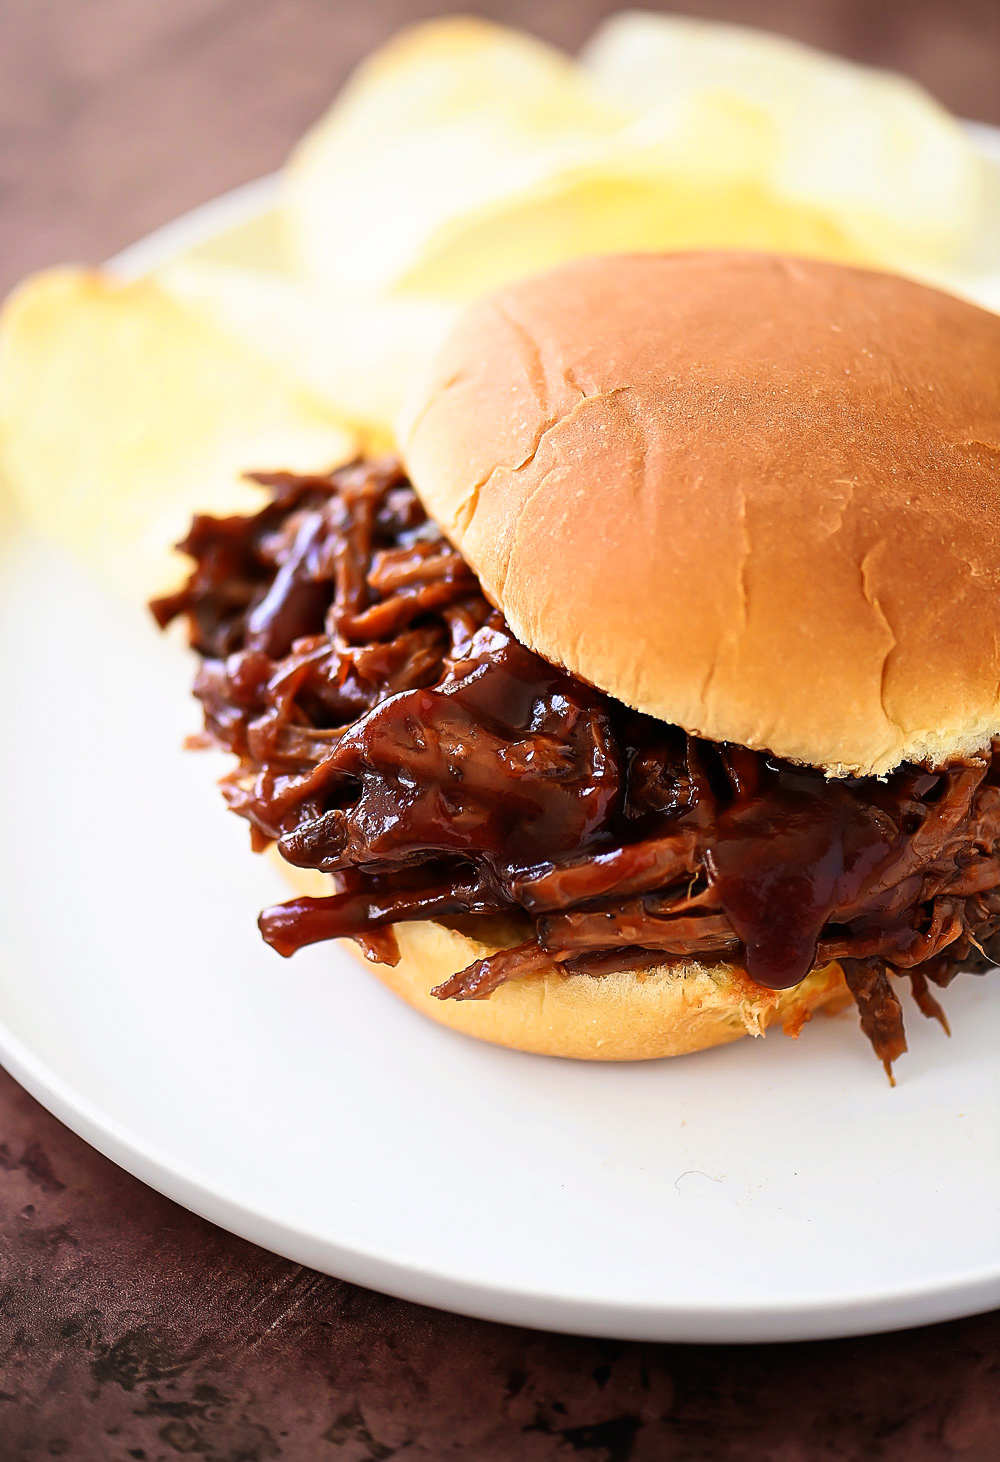 Sweet BBQ Beef sandwiches are delicious shredded beef with a sweet and savor BBQ flavor stuffed between two hamburger buns.